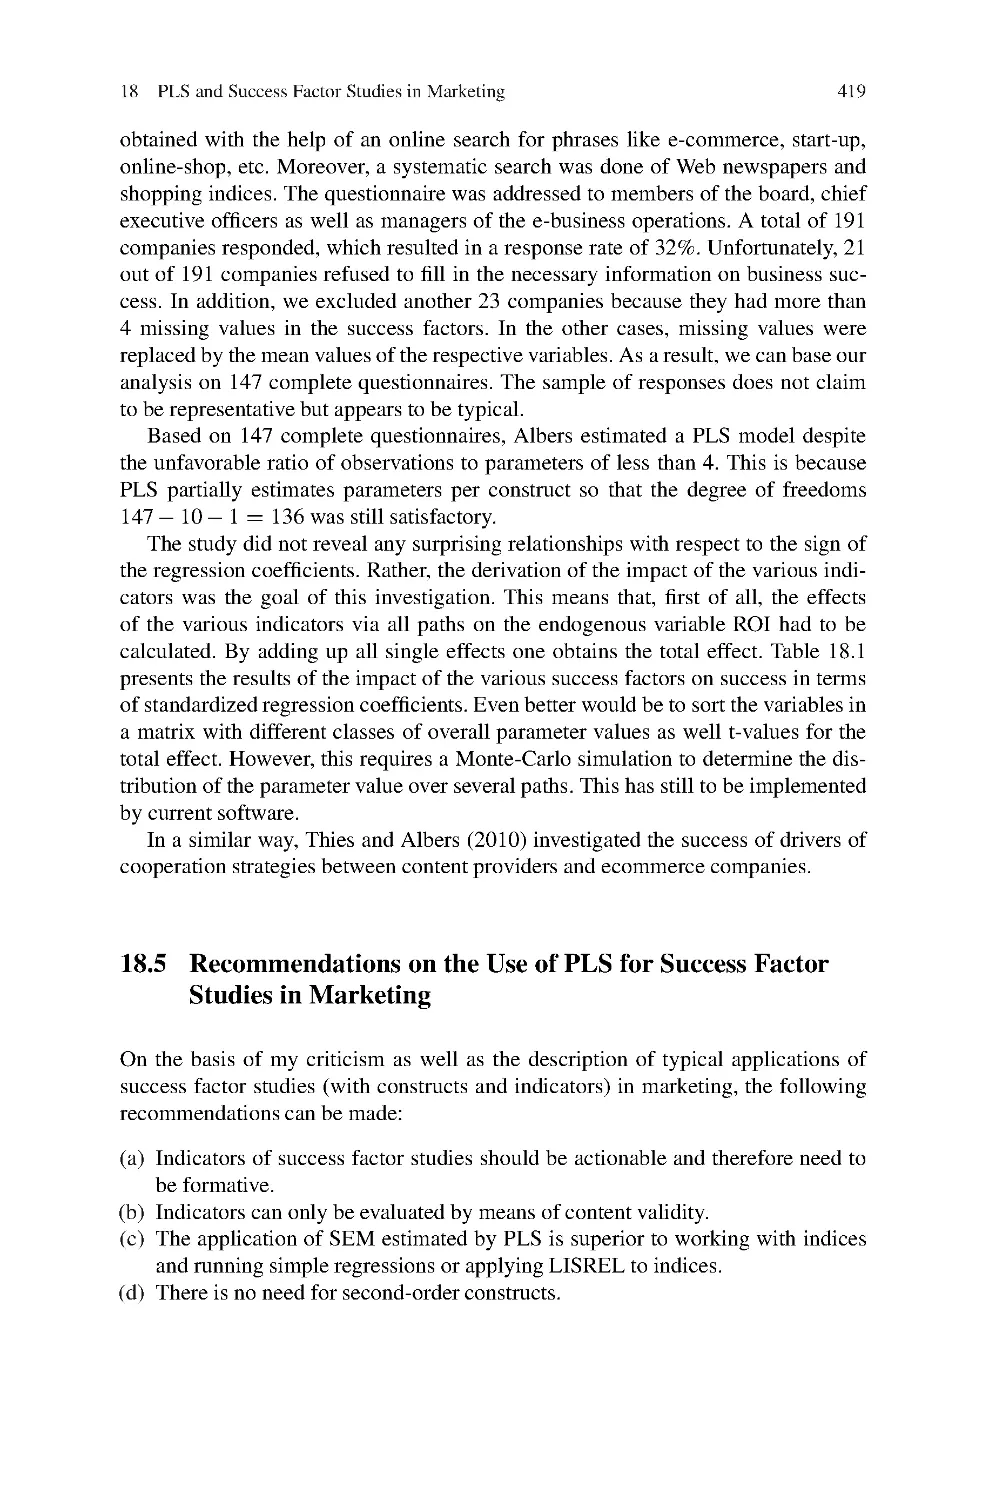 18.5 Recommendations on the Use of PLS for Success Factor Studies in Marketing